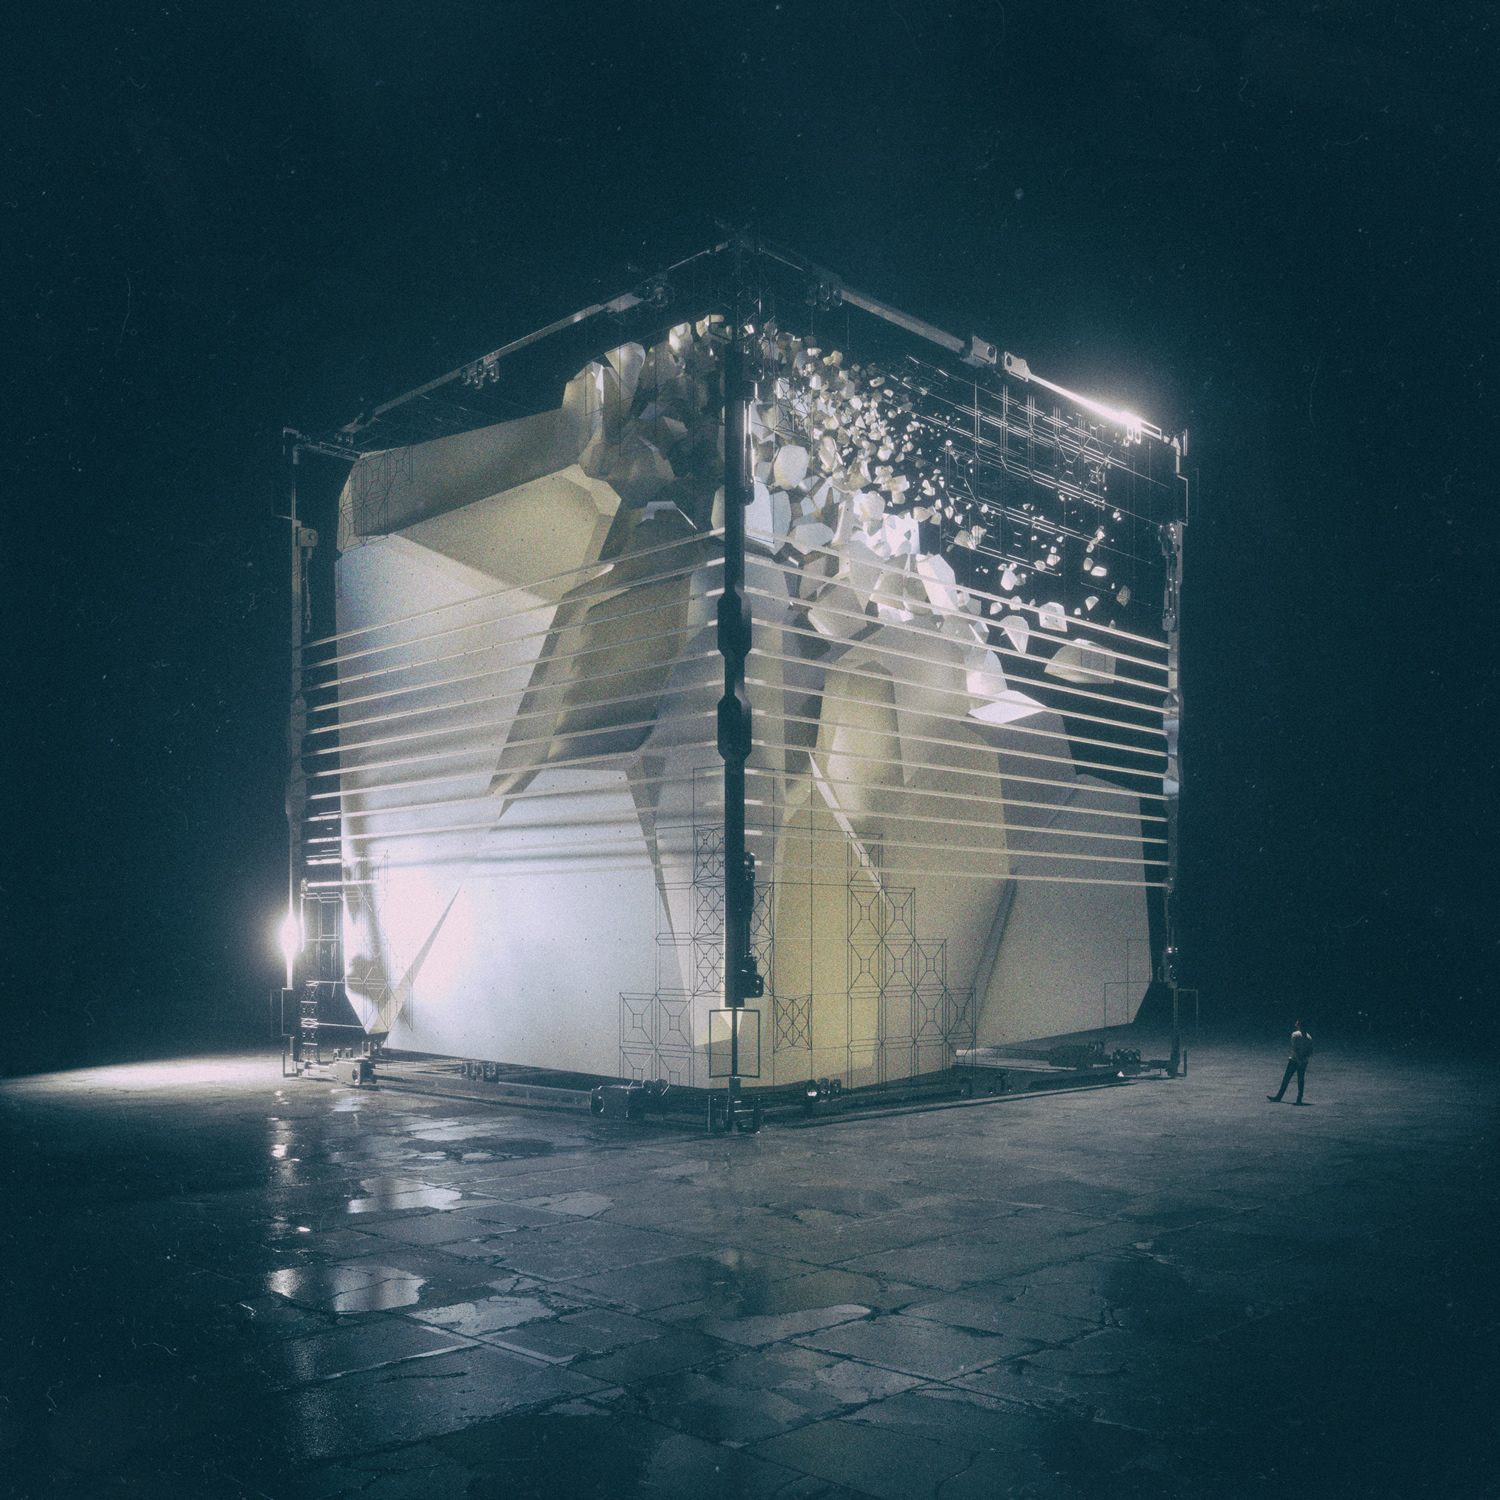 The Unstoppable Beeple with the Everydays Series